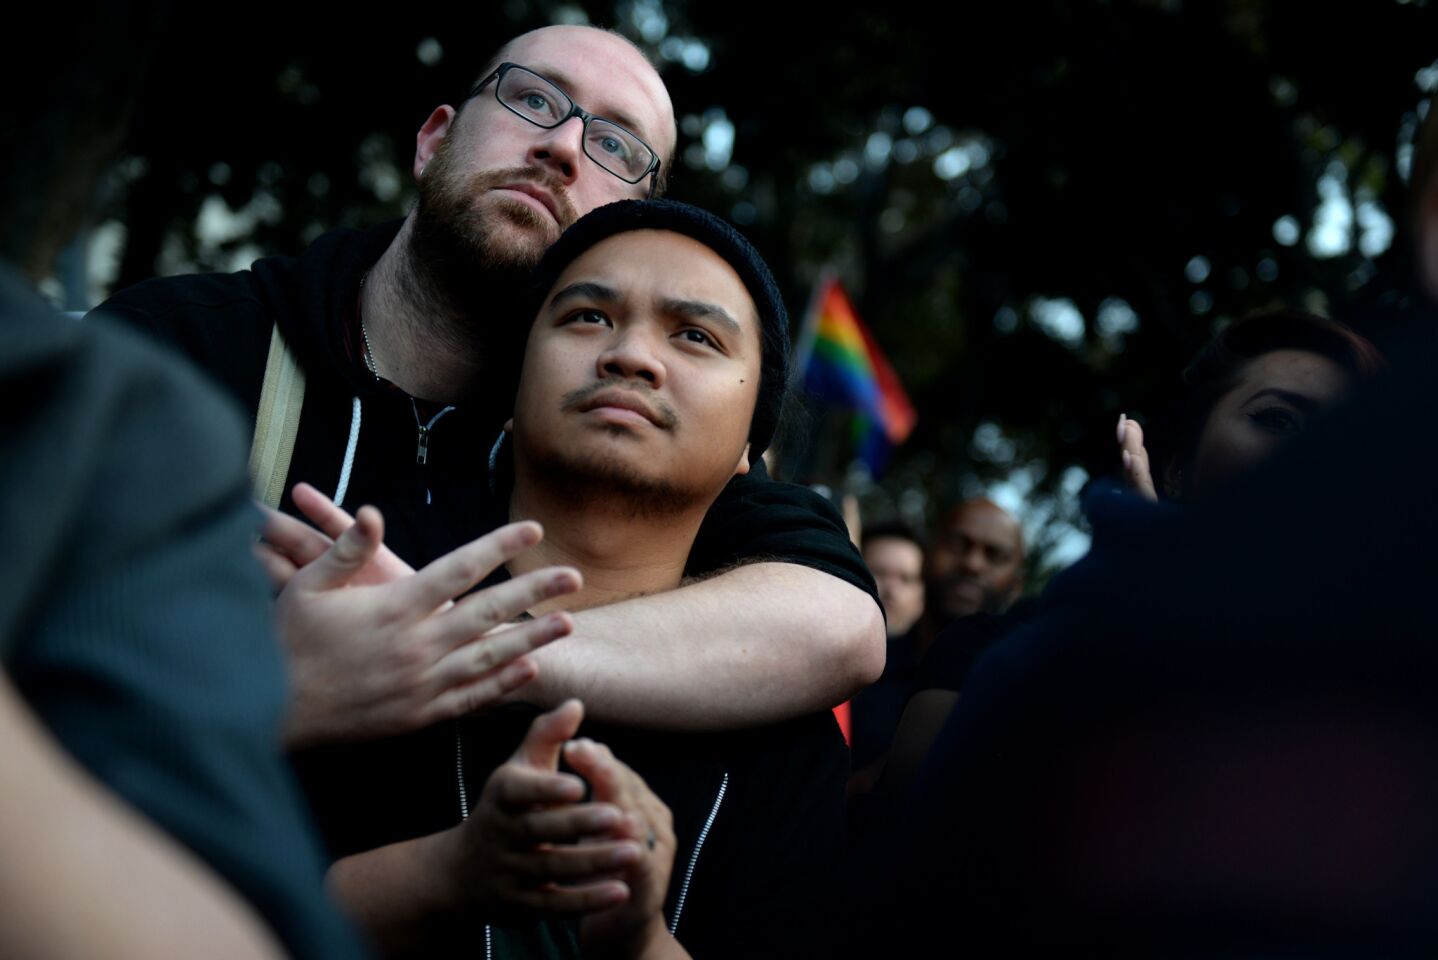 Scott Phillips and Em Enagan mourn for the 49 lives lost in the Orlando shooting during a vigil at Los Angeles City Hall.